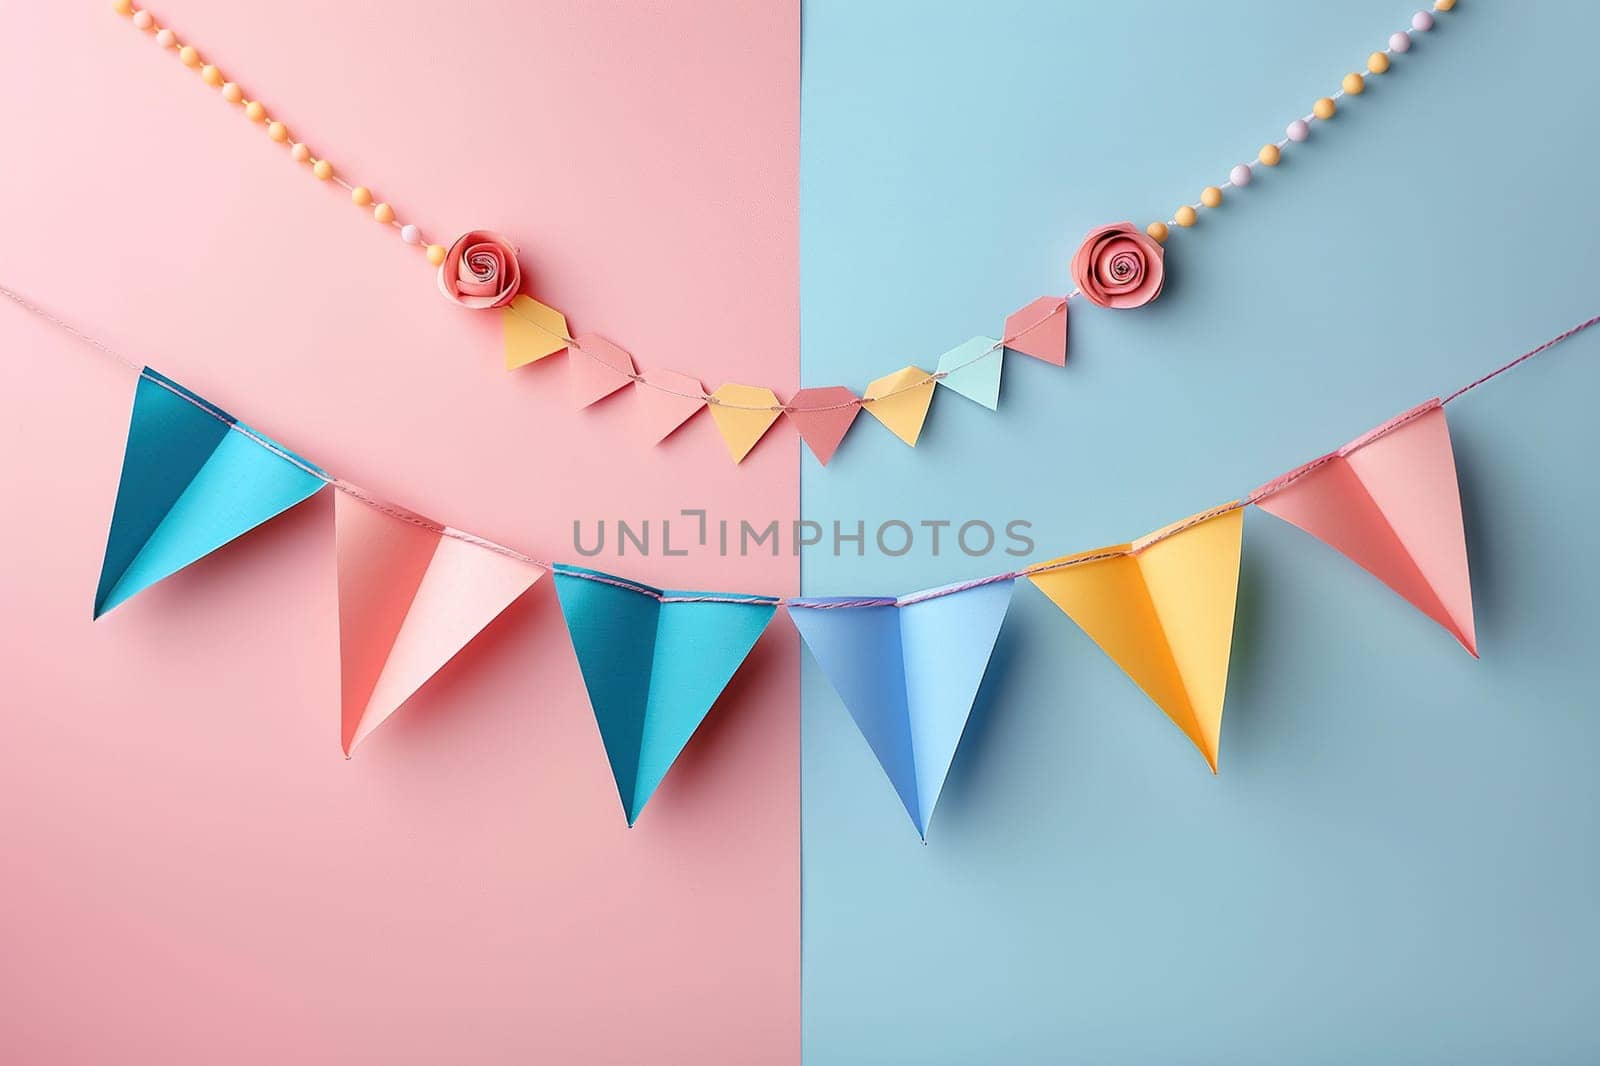 The half pink, half blue wall is decorated with paper hanging garland for the gender party.